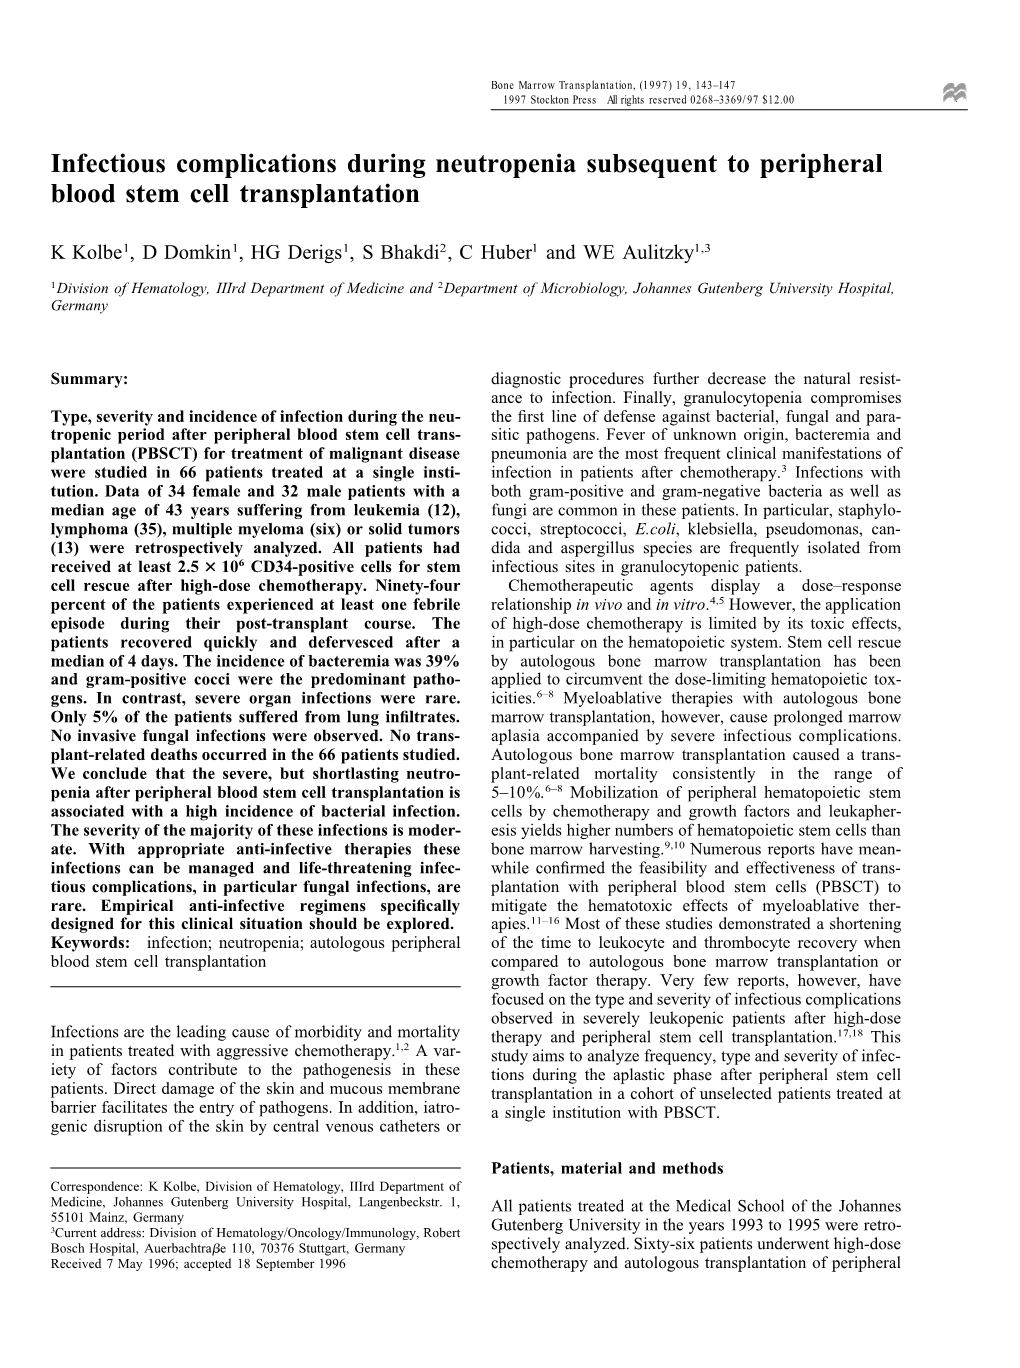 Infectious Complications During Neutropenia Subsequent to Peripheral Blood Stem Cell Transplantation